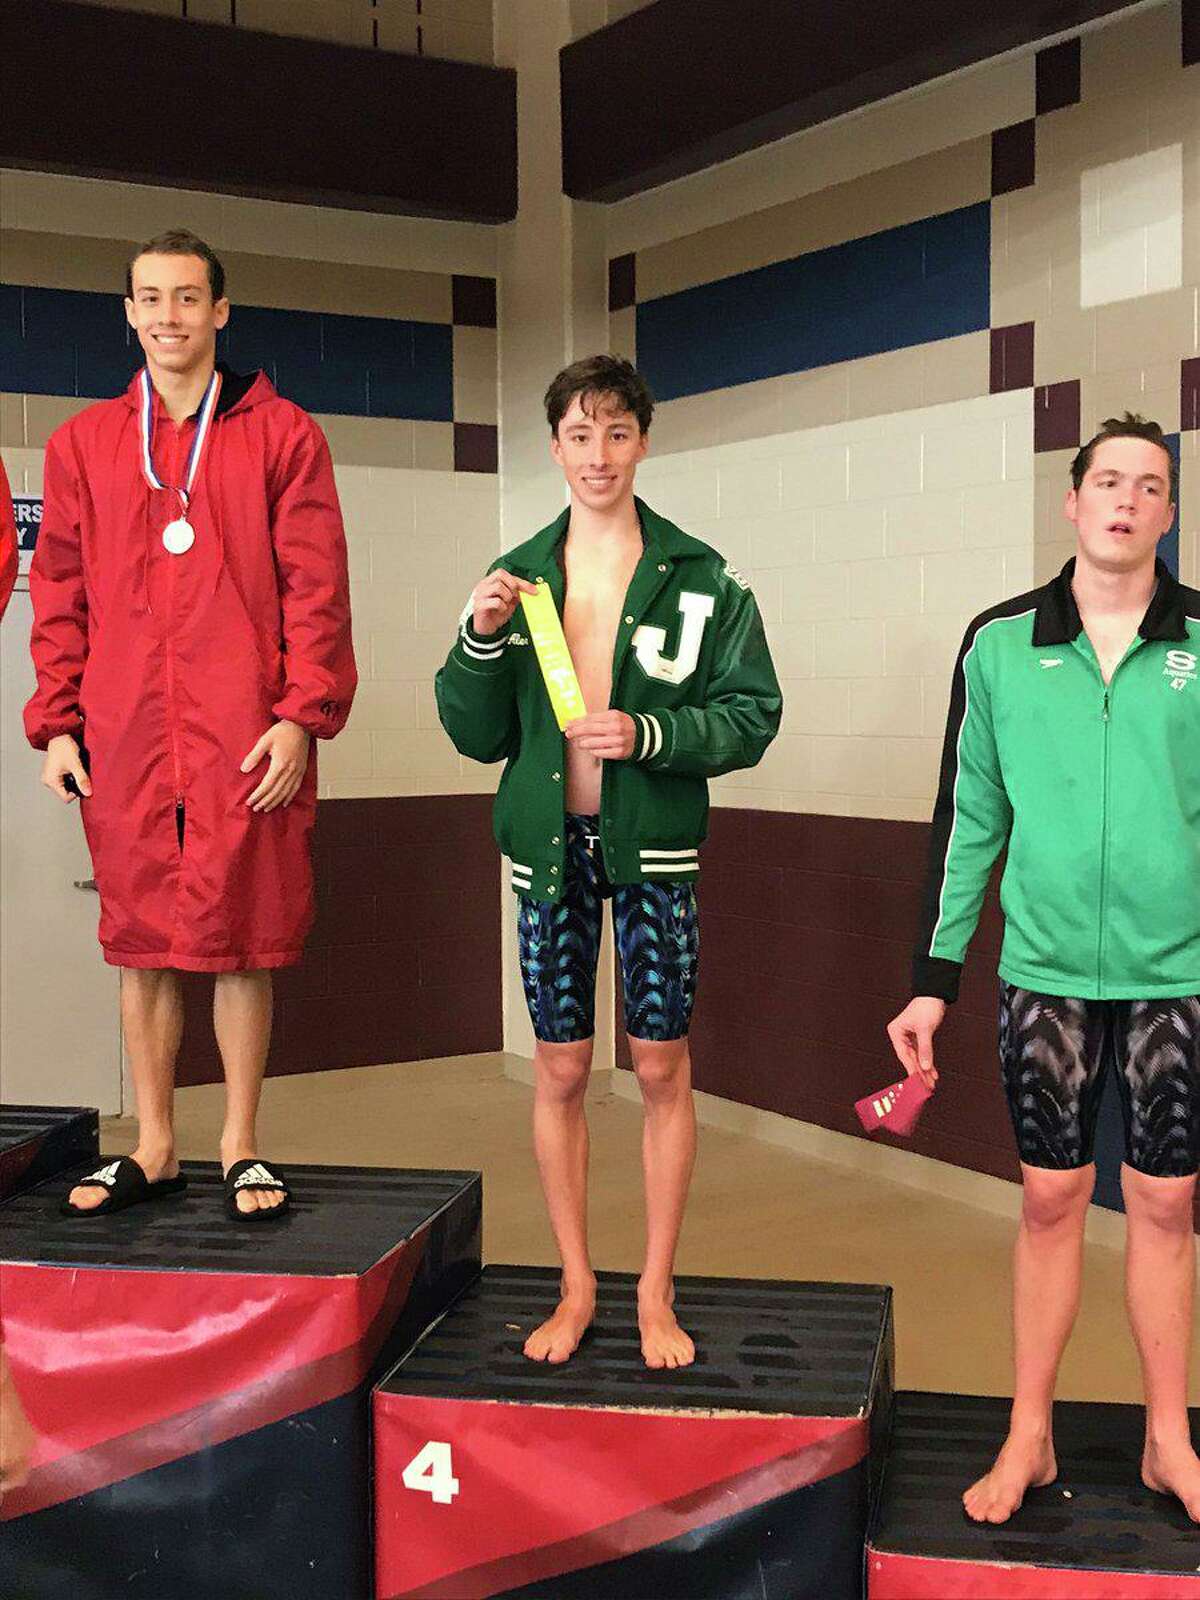 Strake Jesuit junior Alex Culligan broke a school record and earned a call-up to the UIL state championships with a regional time of 57.81 seconds in the 100-yard breaststroke.